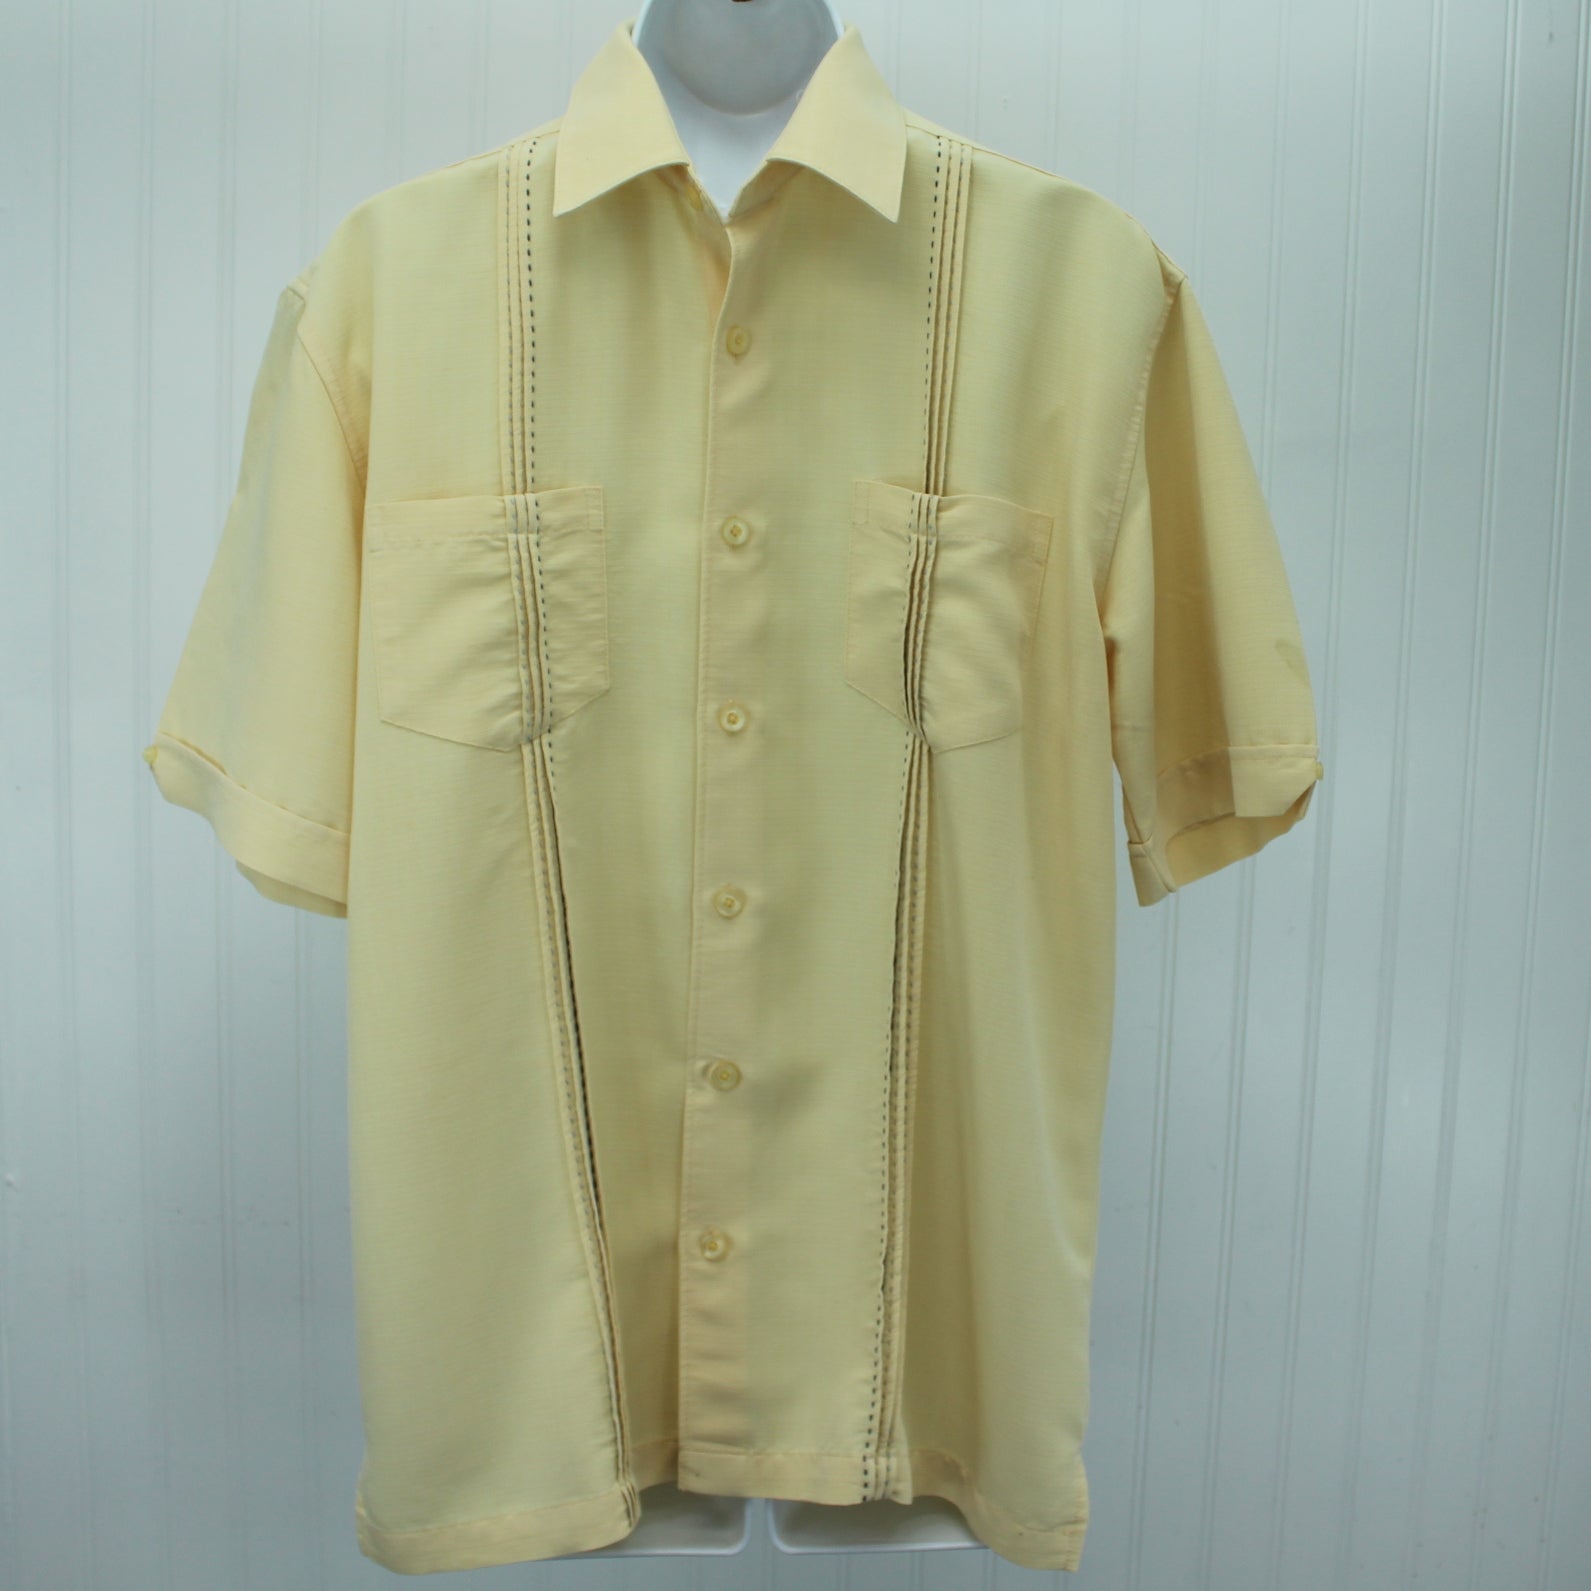 Cubavera Shirt Cream Color Tucked Blue Stitched Front M/M Chest 45"